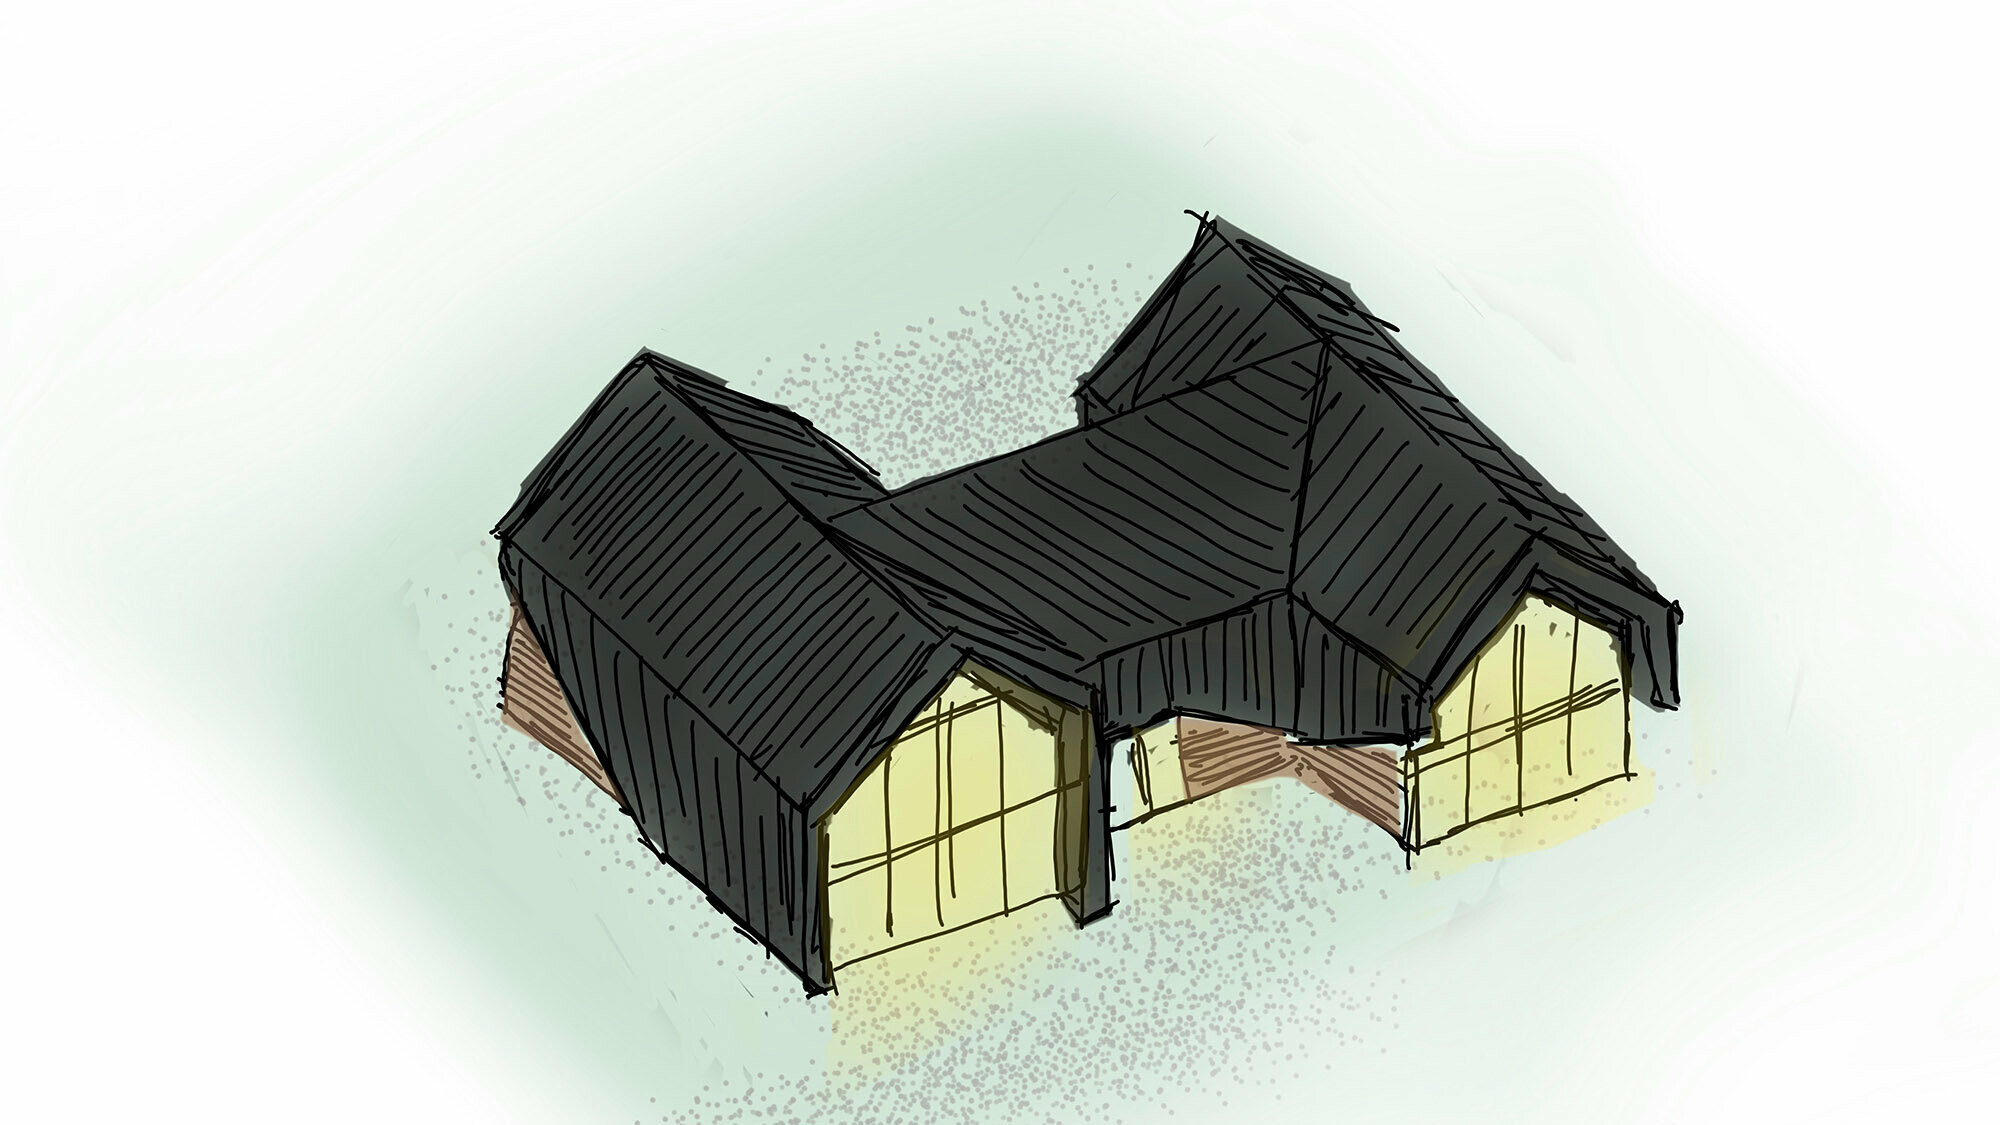 Concept drawing of a modern detached house with several pitched roofs, covered with black Prefalz roofing sheets. The walls are made of exposed wood and large glass windows that provide bright interior lighting. The sketch shows the house from a bird's eye view, emphasised by the shadow effect and the slight blurring, which gives the impression of a lively and dynamic representation.